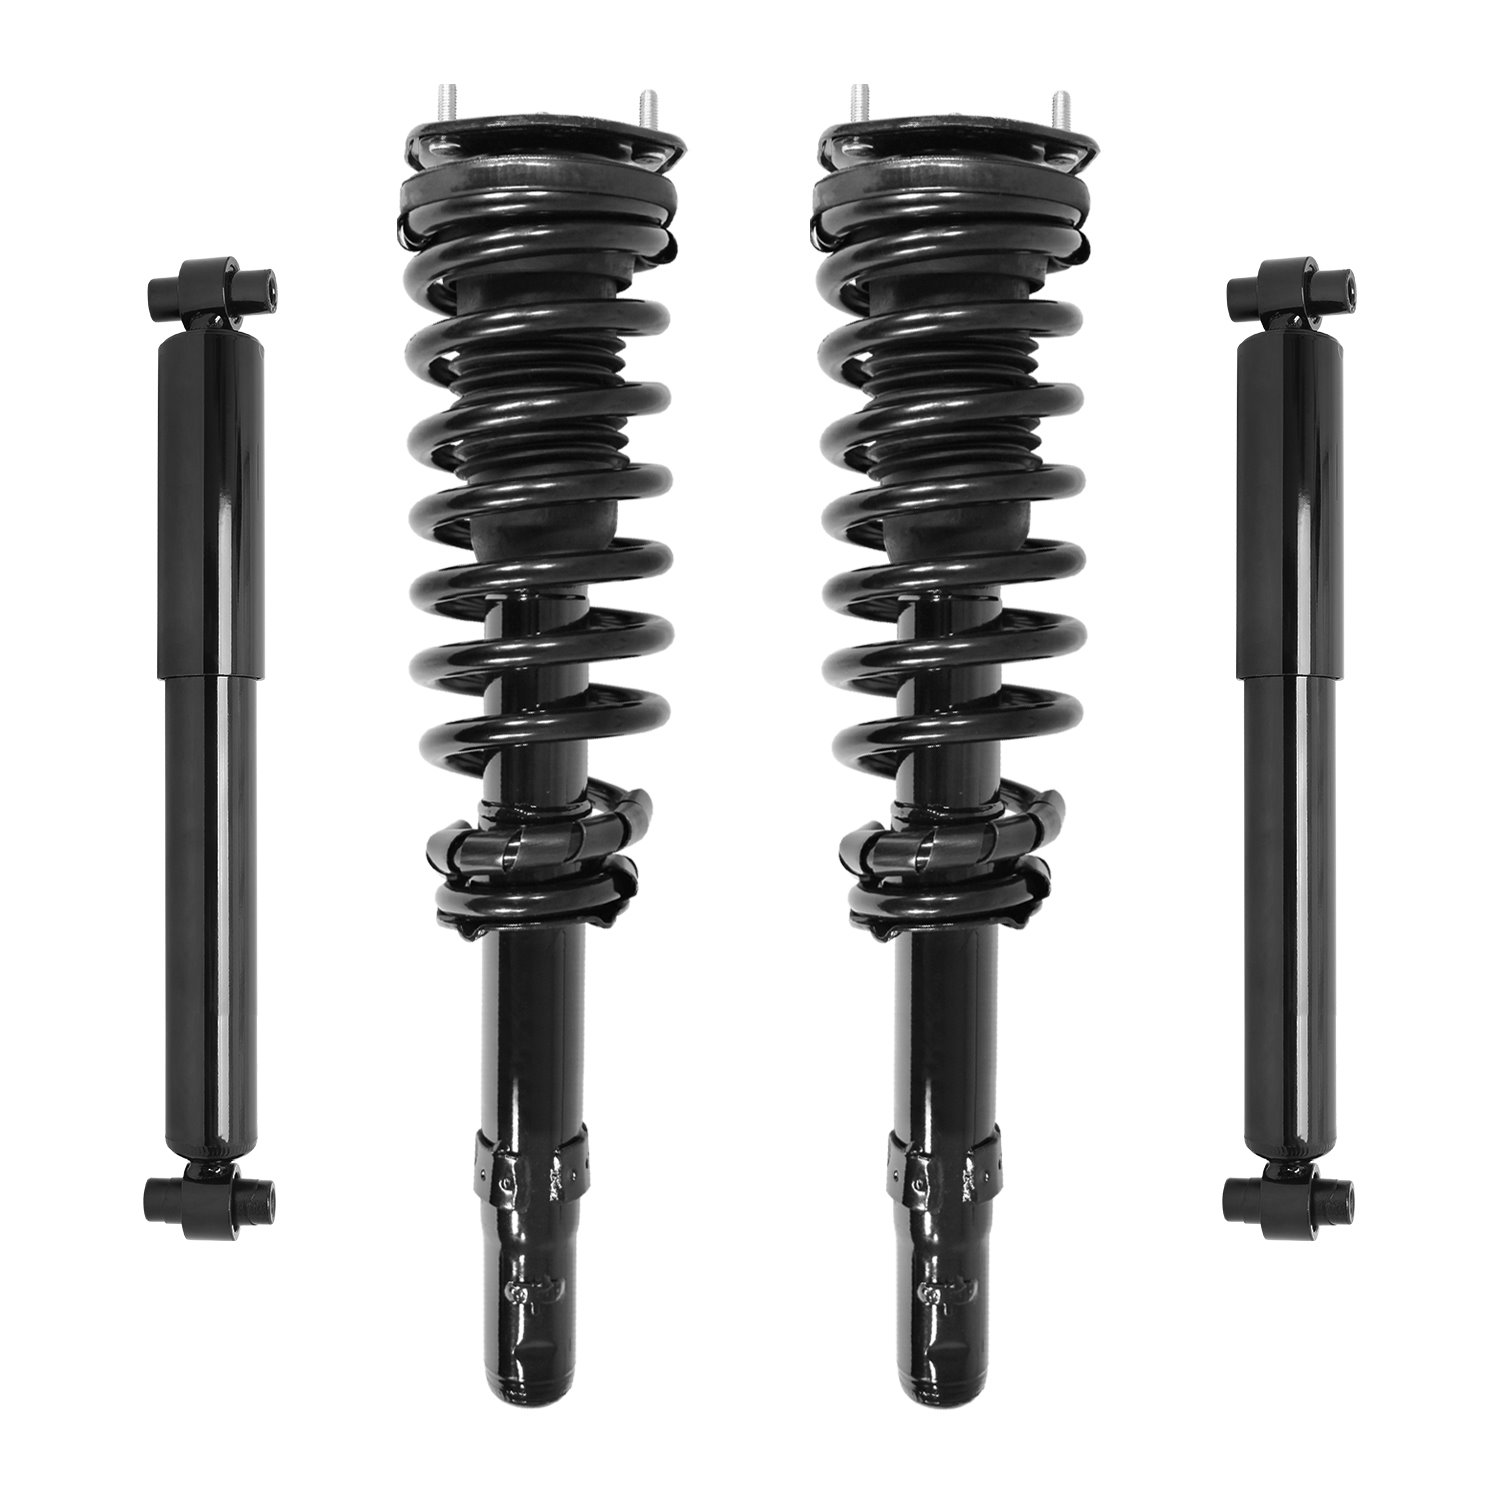 2-11990-001 Suspension Strut & Coil Spring Assembly Set Fits Select Ford/Lincoln/Mercury